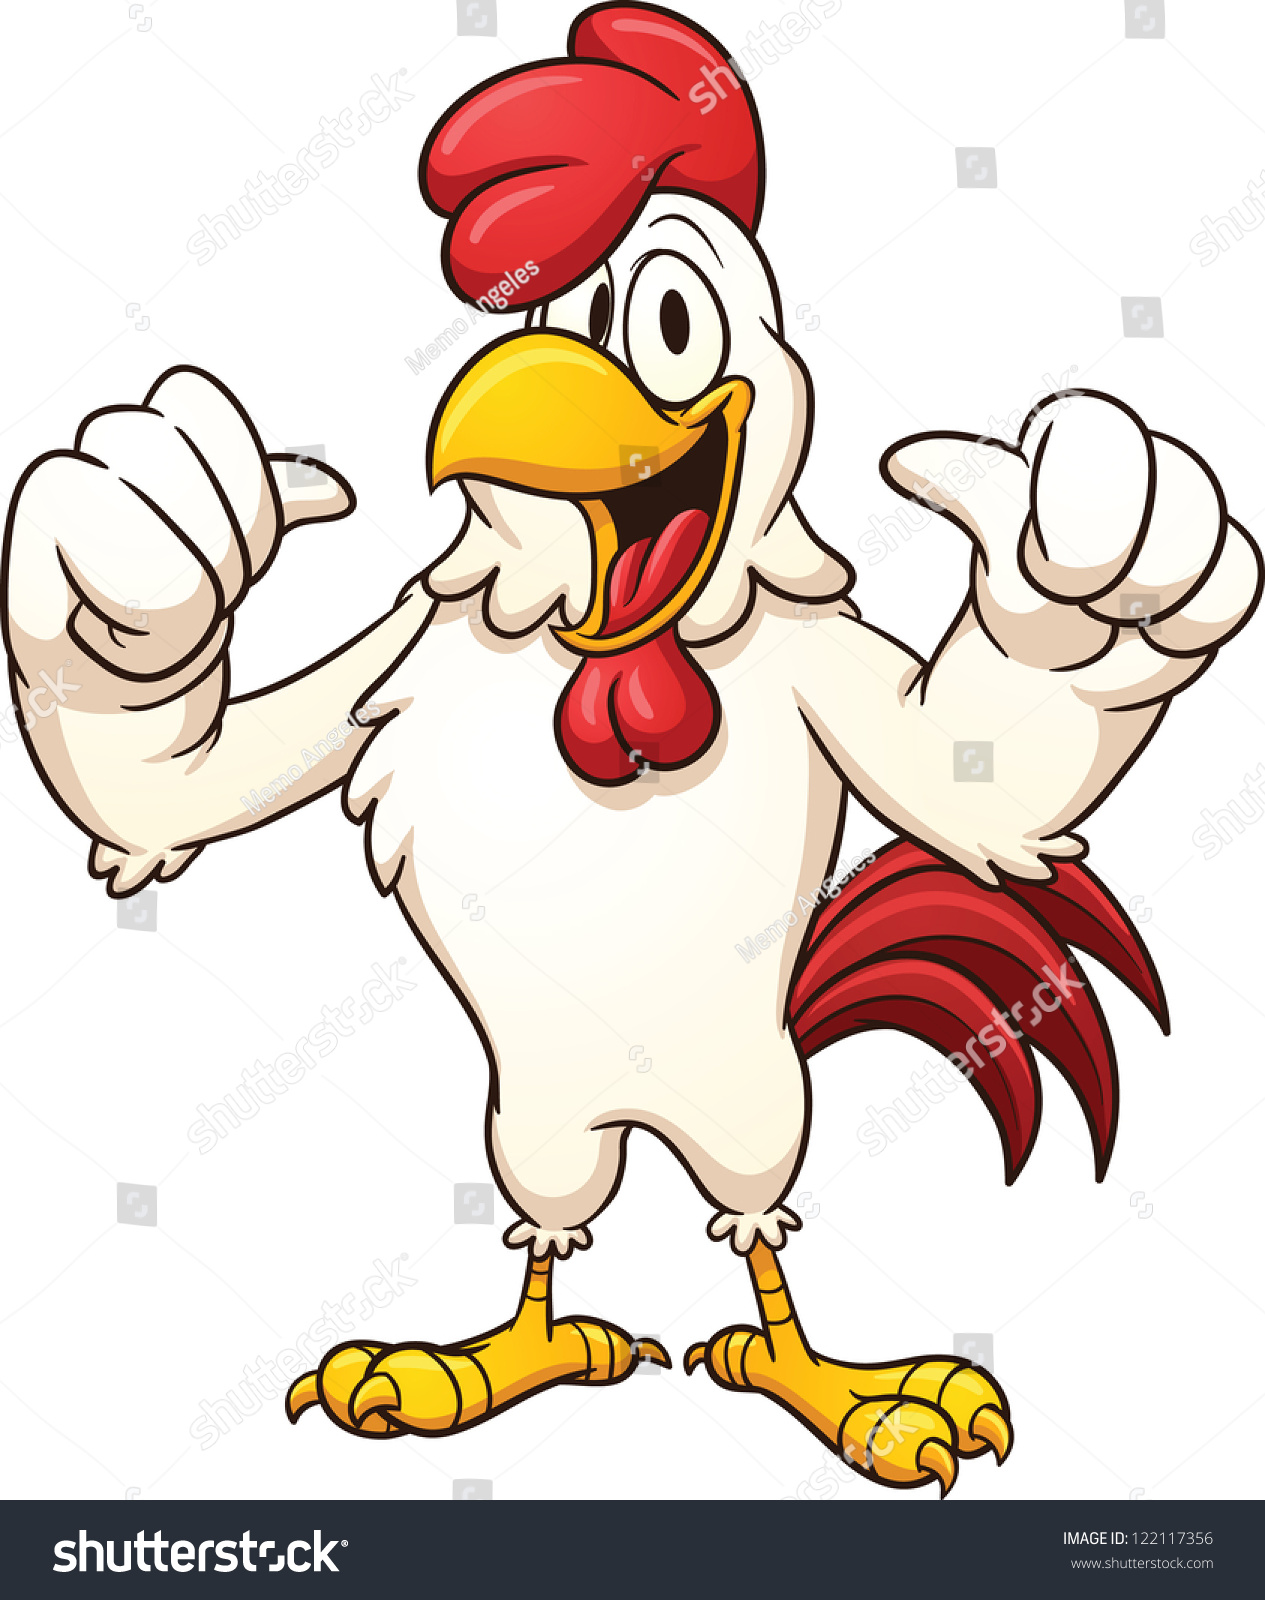 red rooster clipart - photo #45